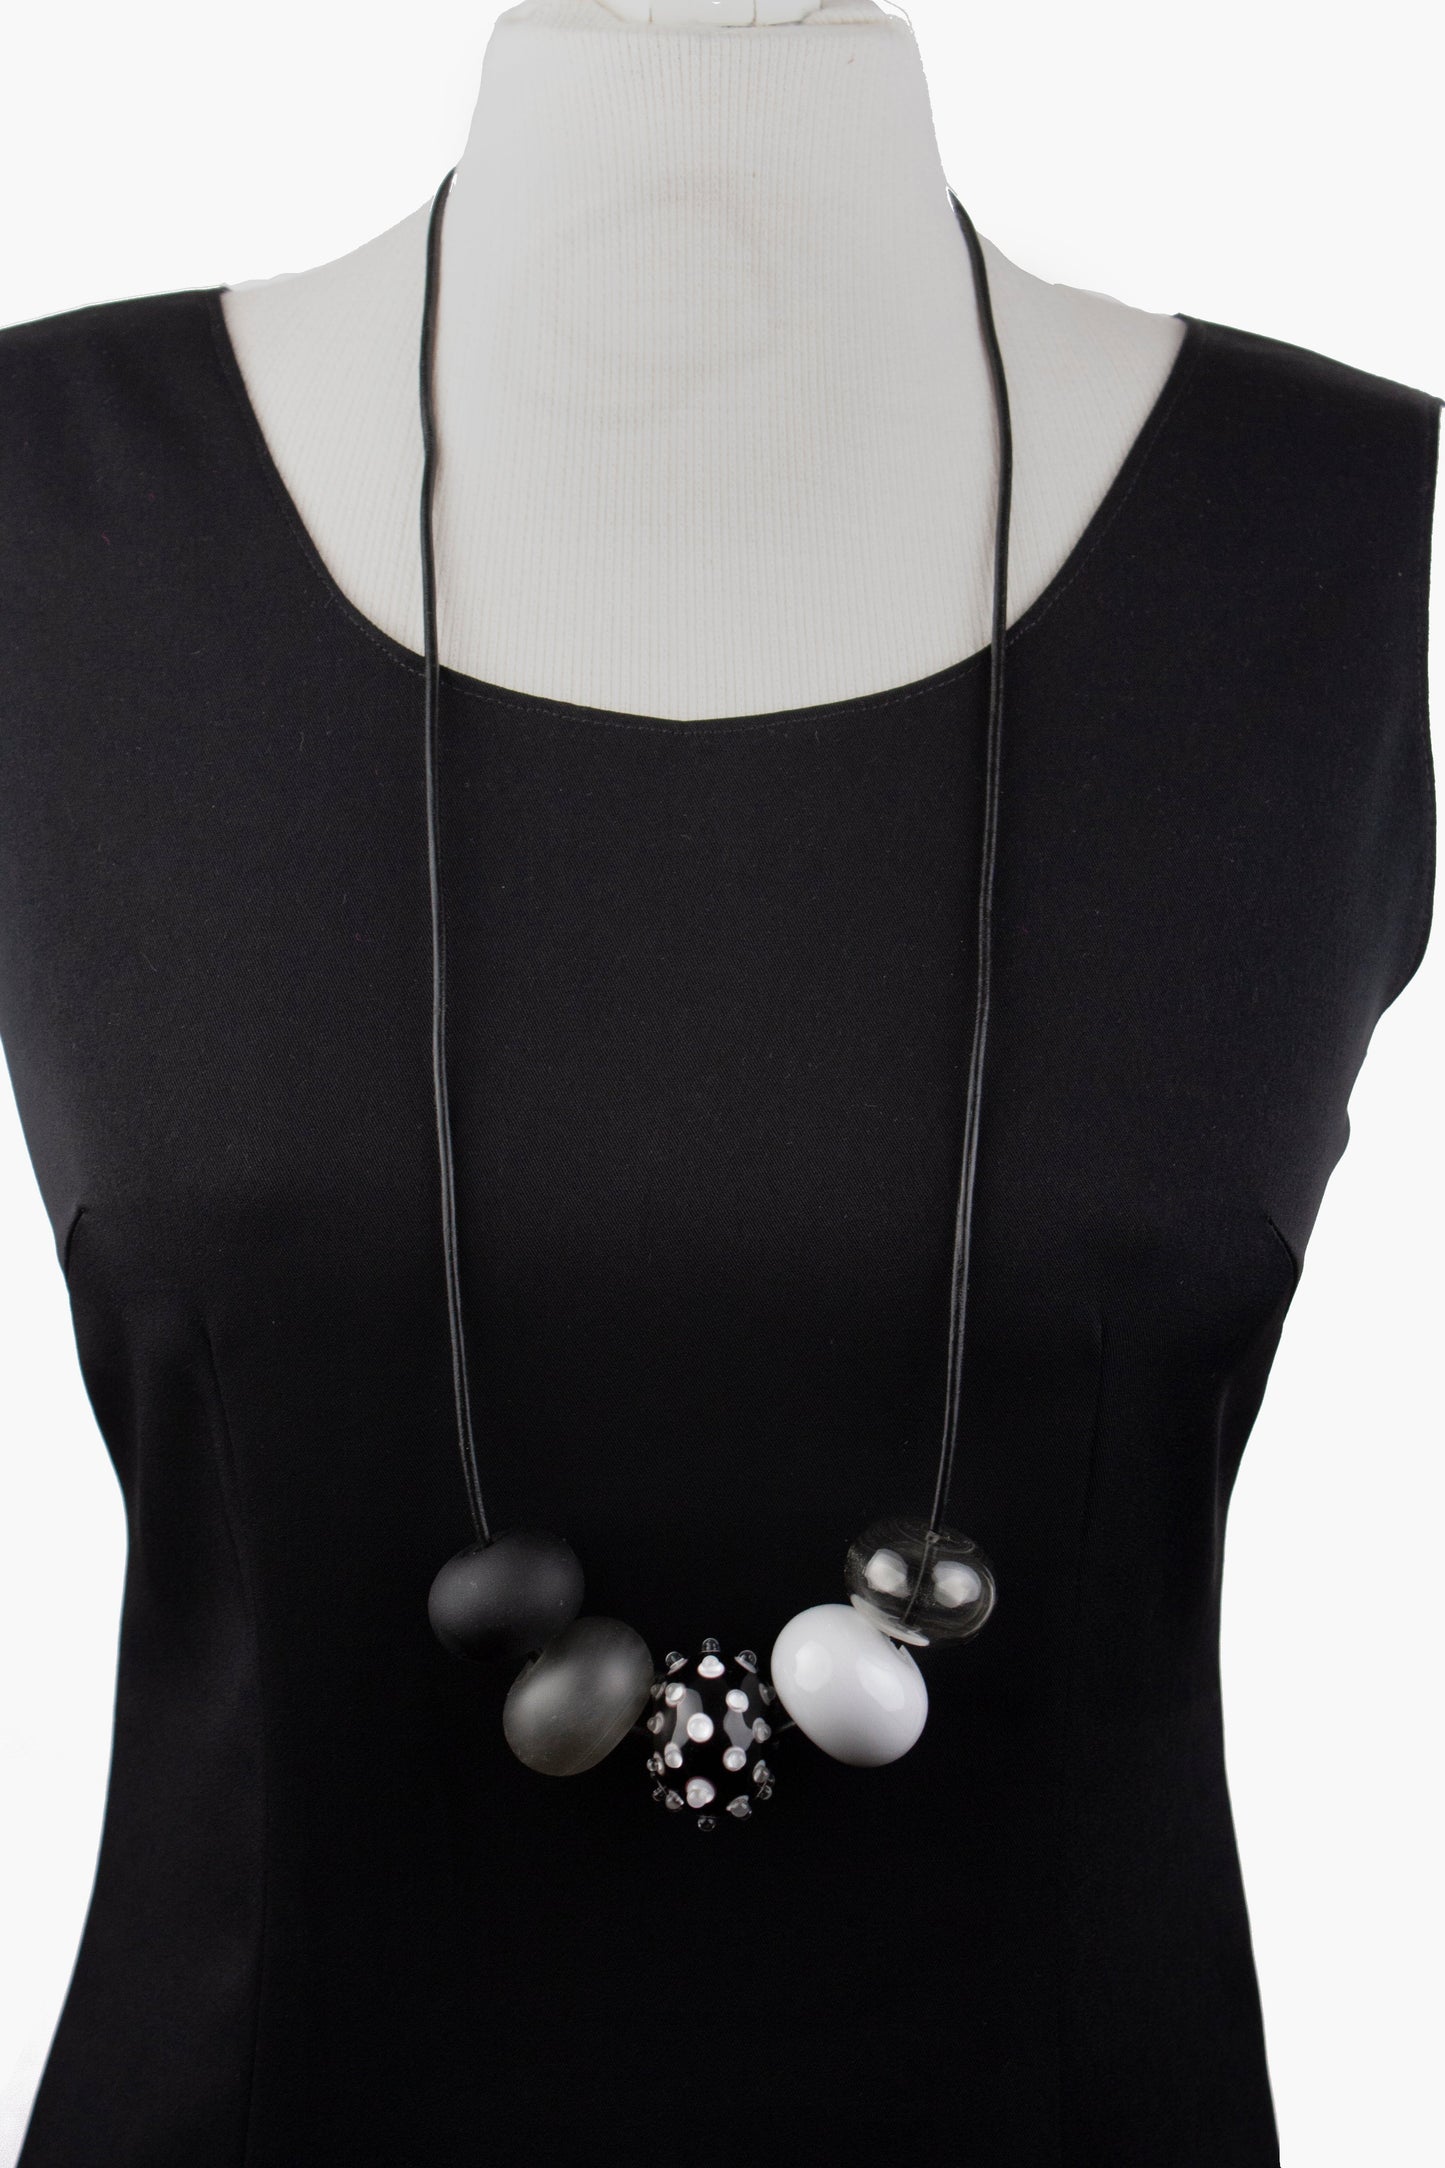 5 bubble bead necklace - black and white with focal bead